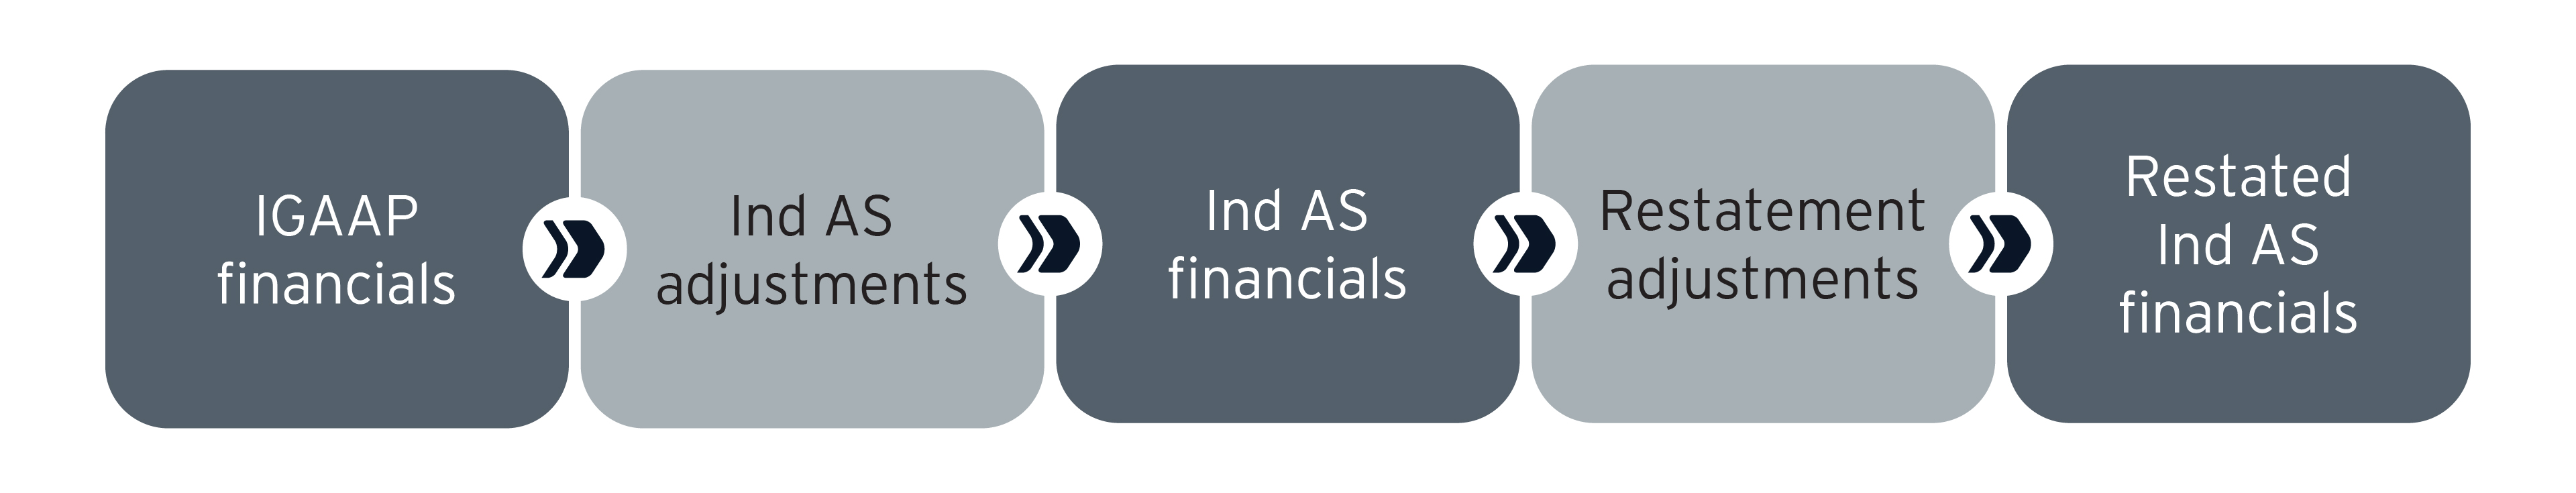 Transition to Ind AS and restated financial statements